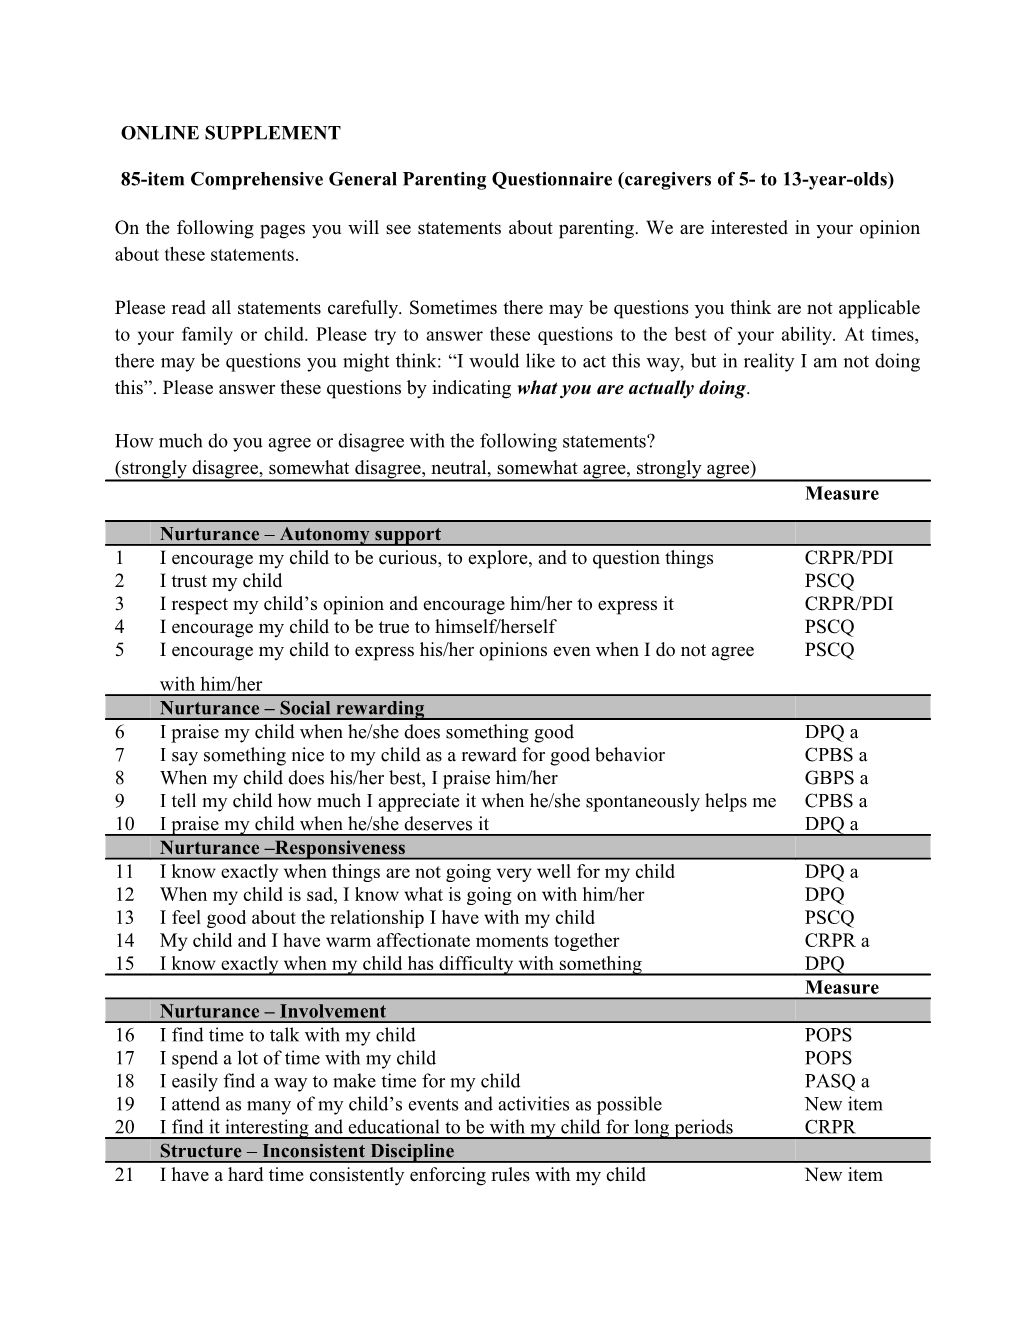 85-Item Comprehensive General Parenting Questionnaire (Caregivers of 5- to 13-Year-Olds)